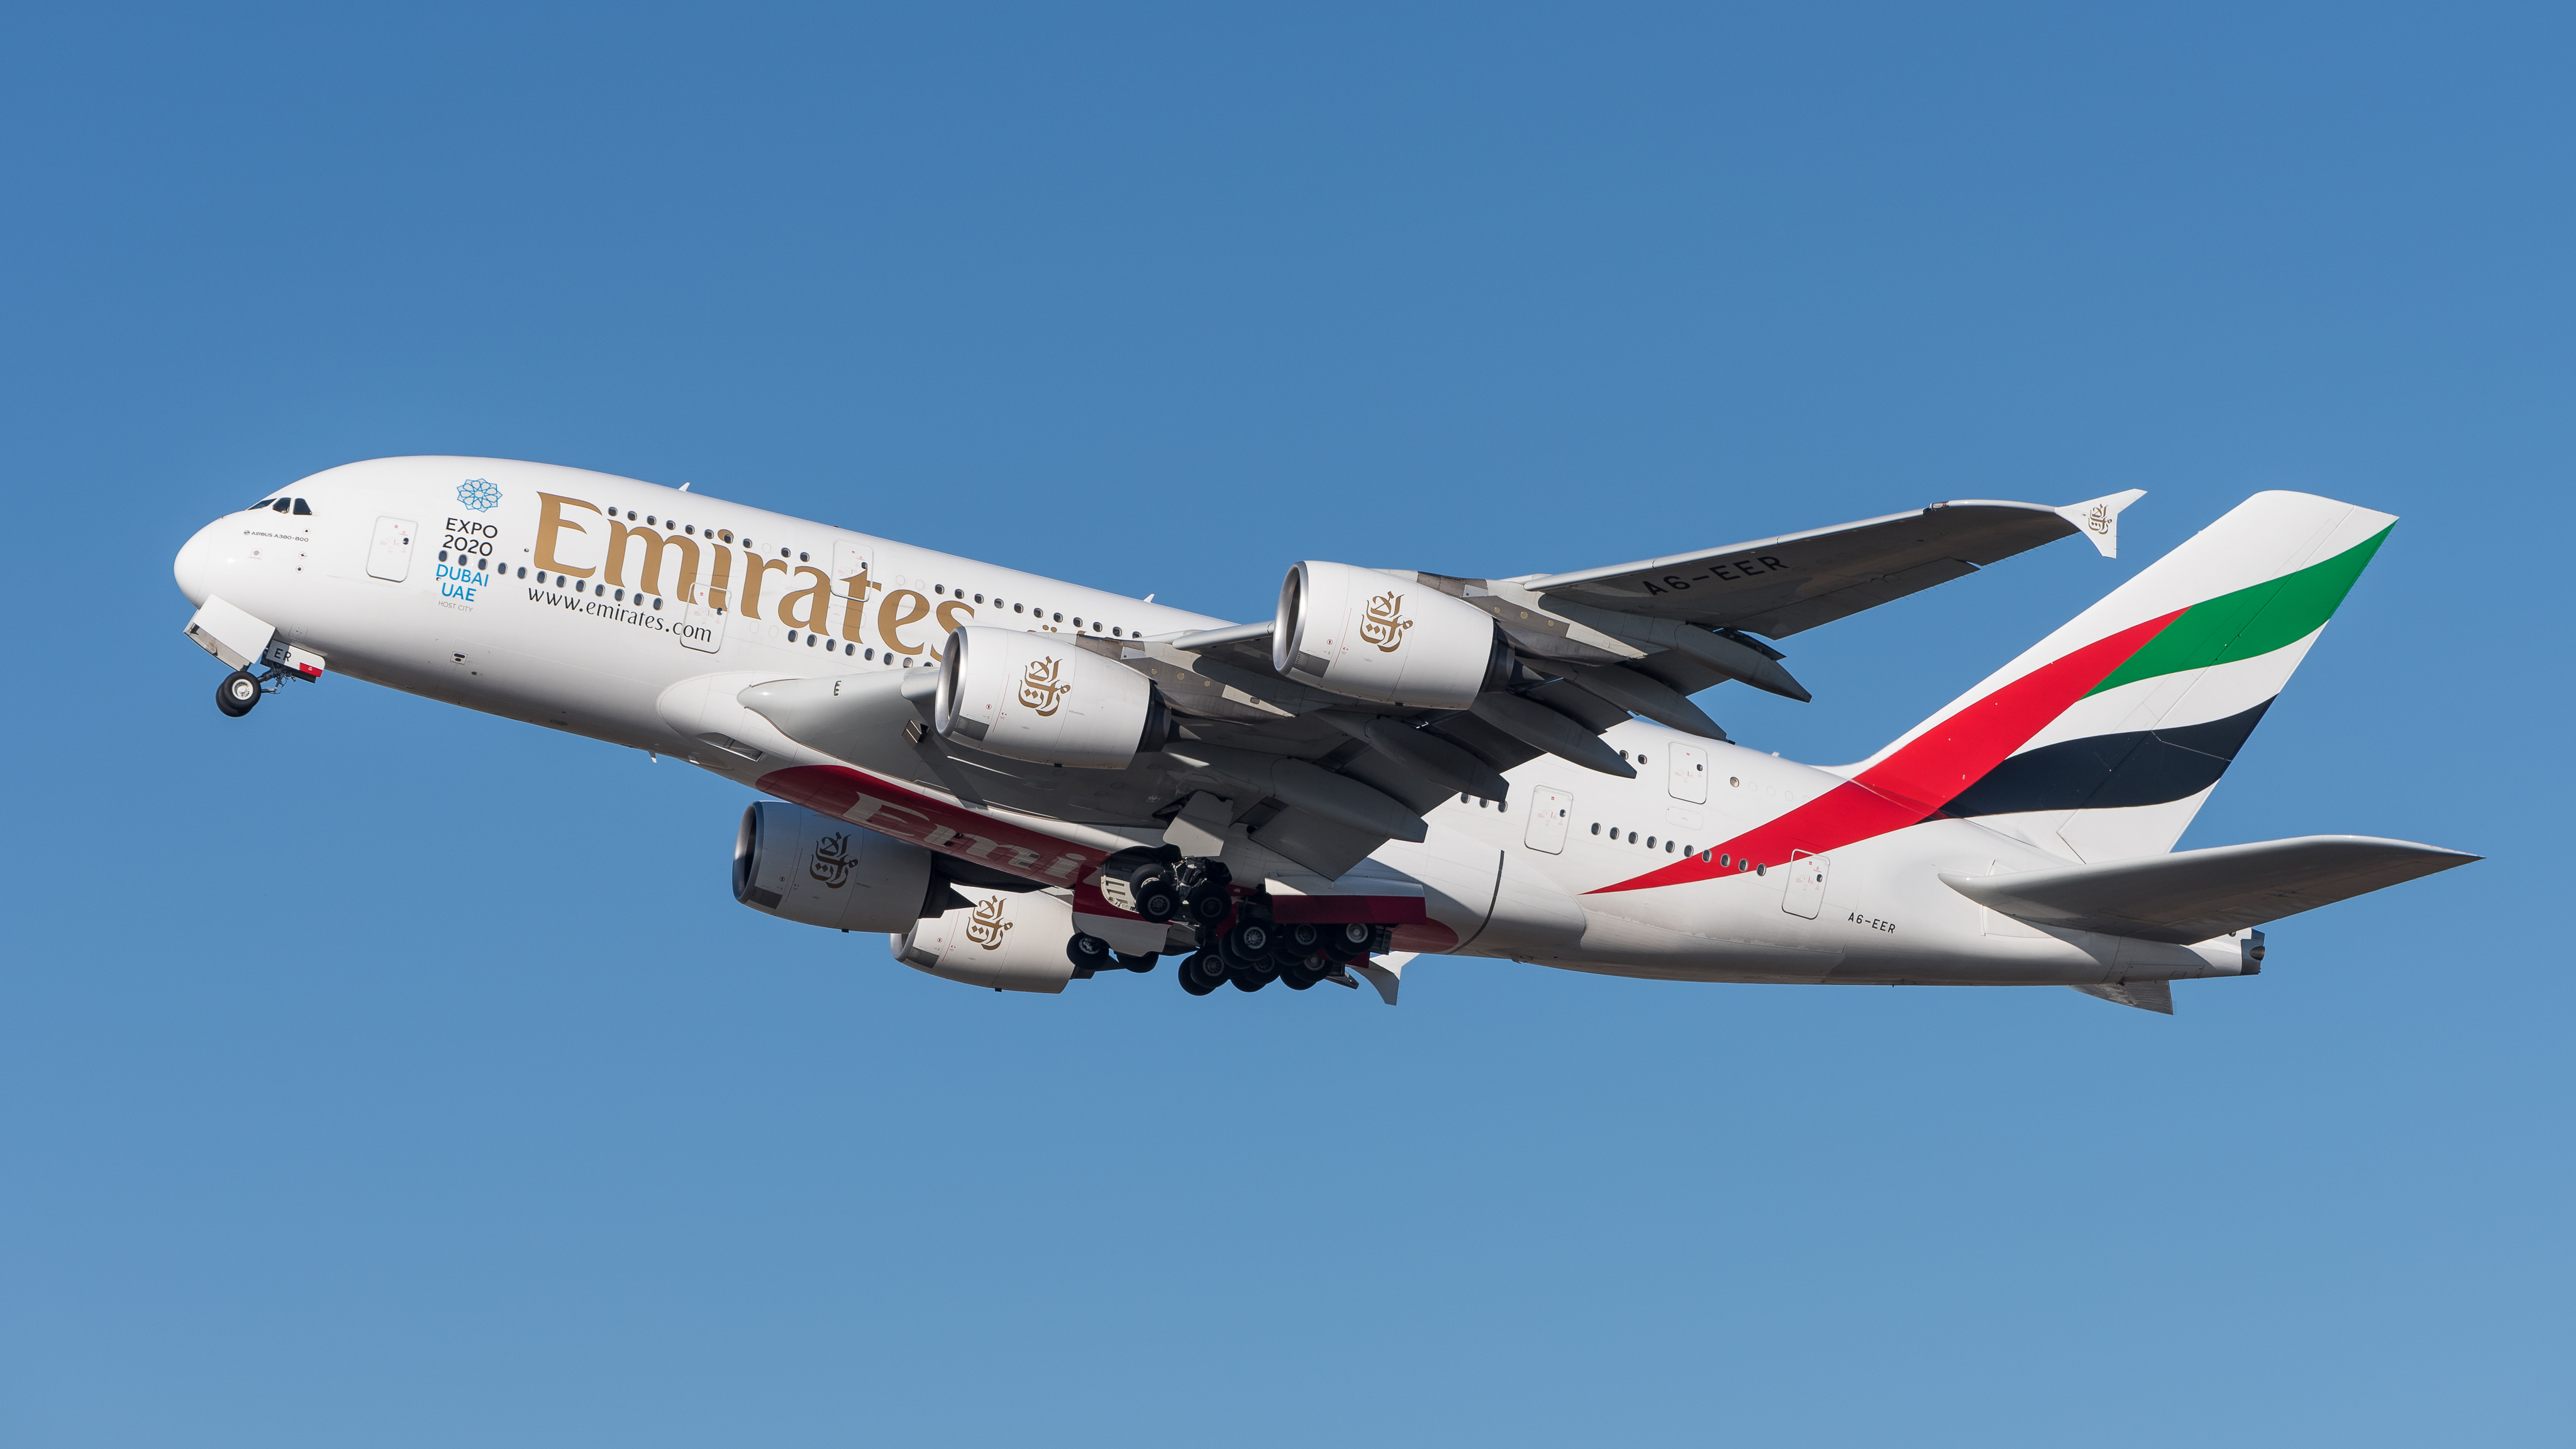 Emirates_Airbus_A380-861_A6-EER_MUC_2015_04 (1)